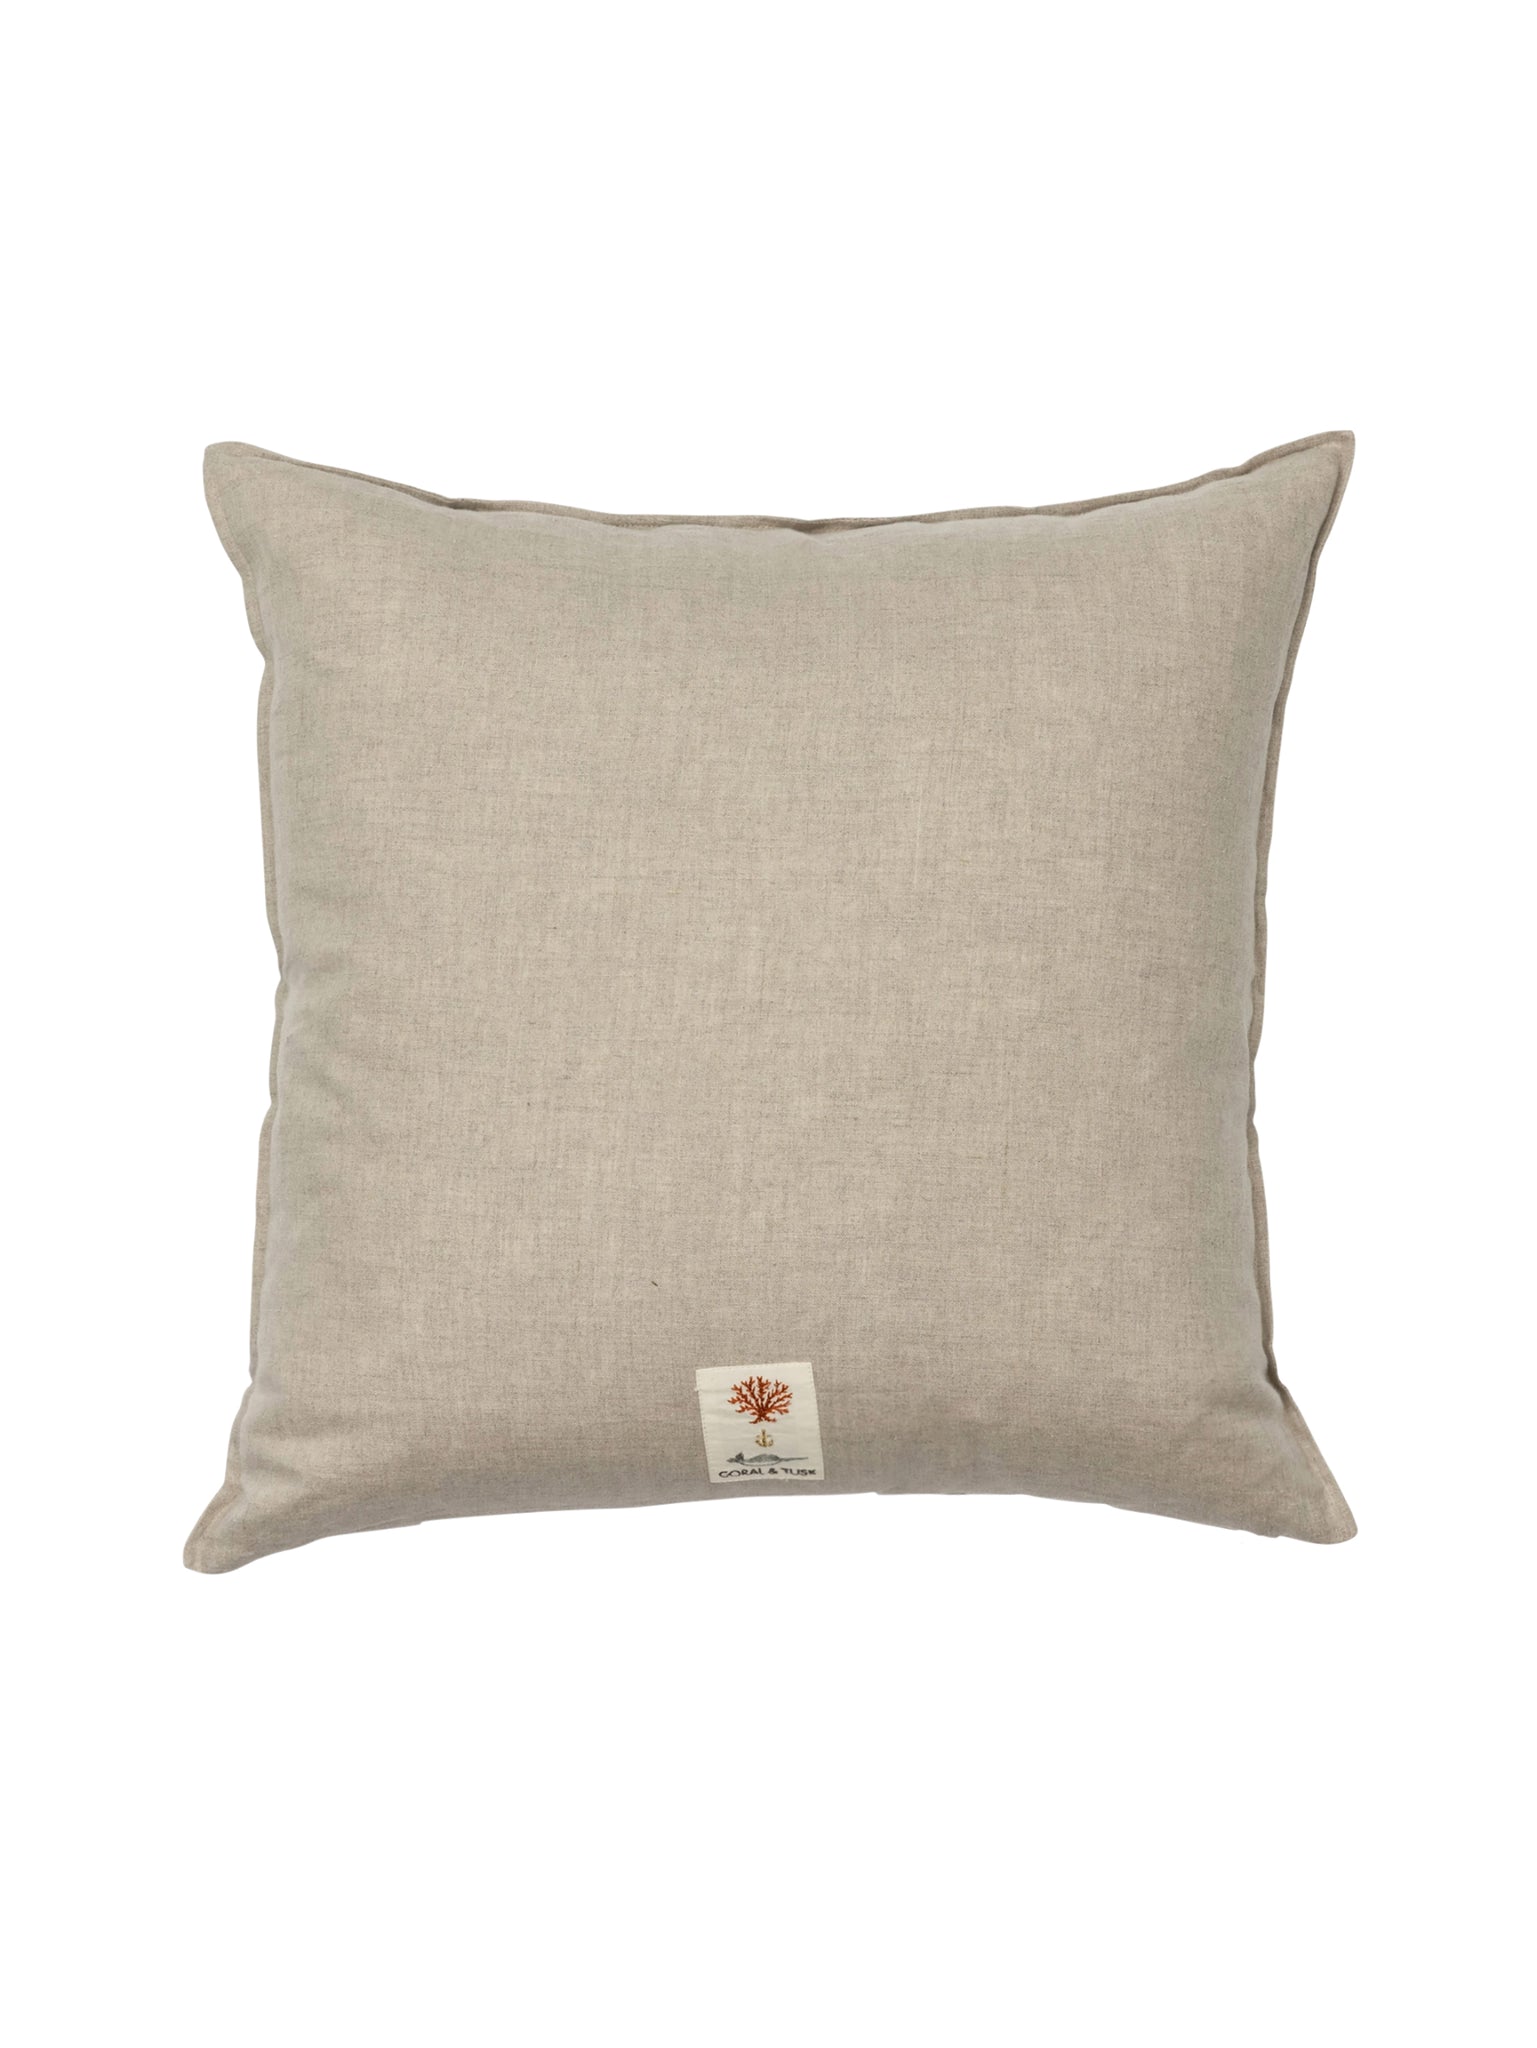 Coral & Tusk Spring Blossoms Pillow Weston Table